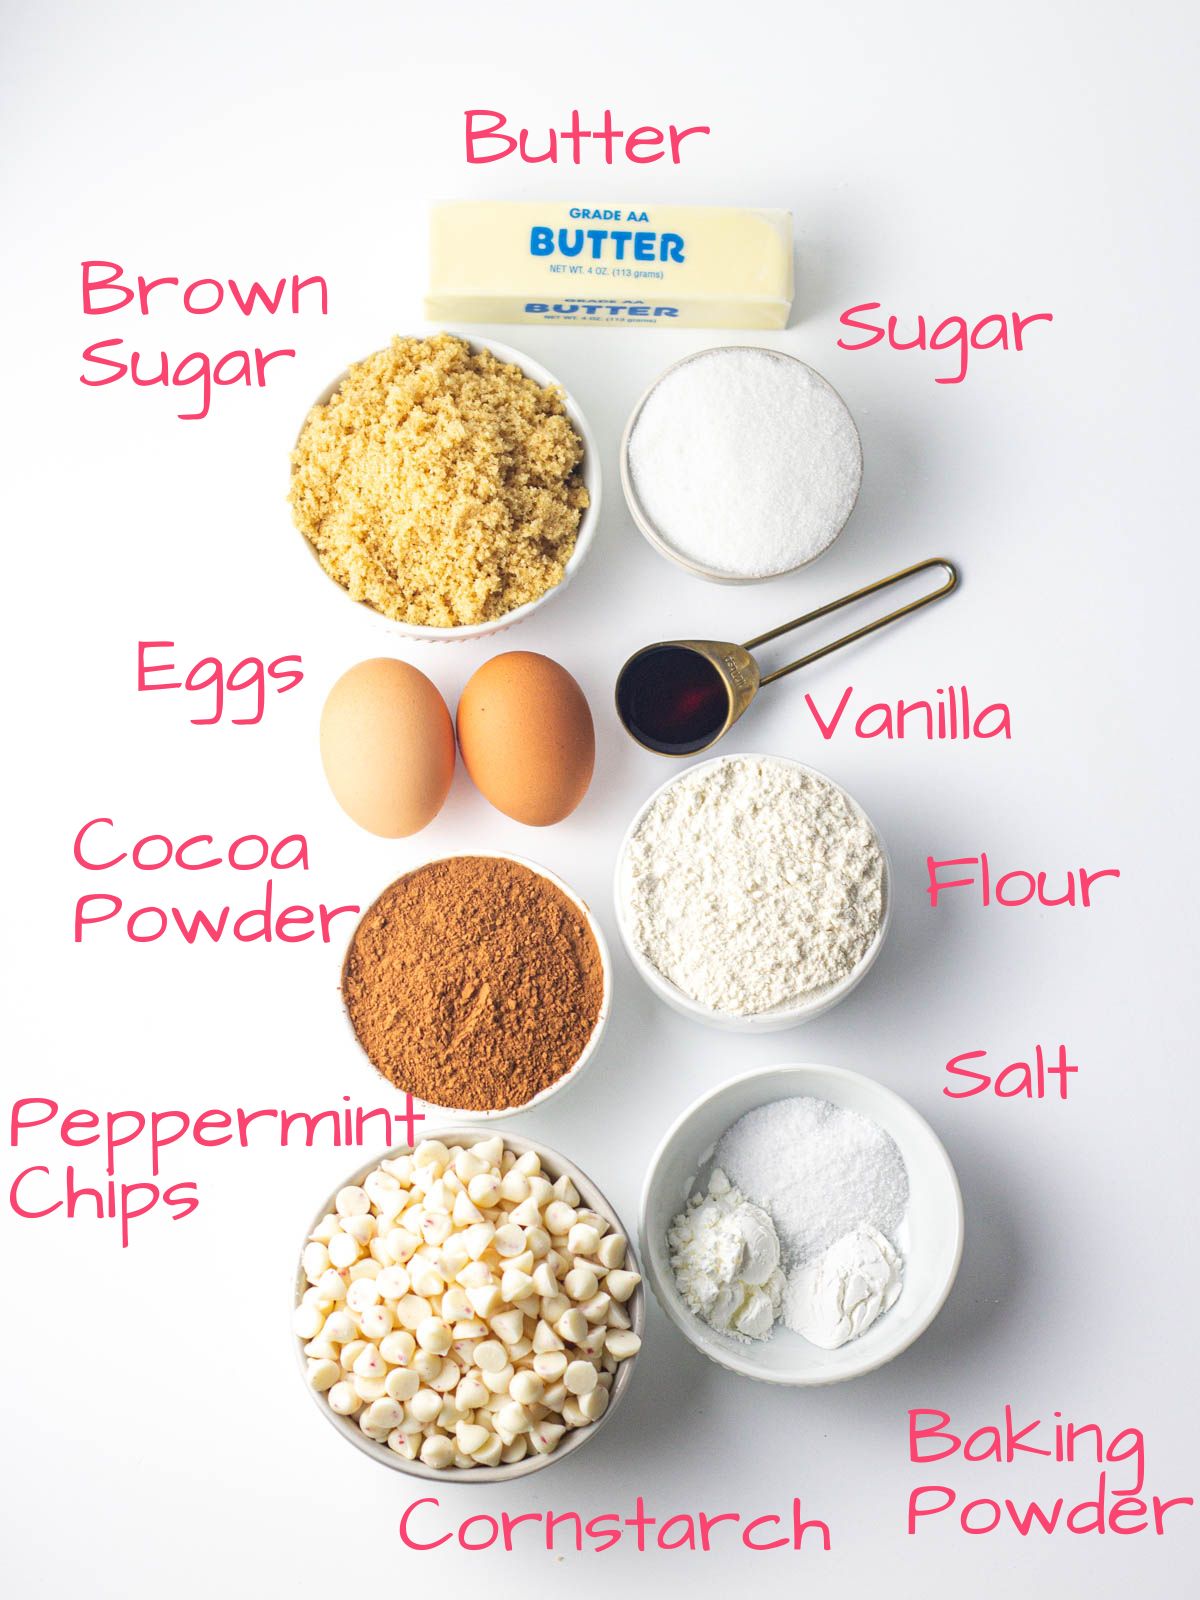 Ingredients needed to make Chocolate Peppermint Cookies.